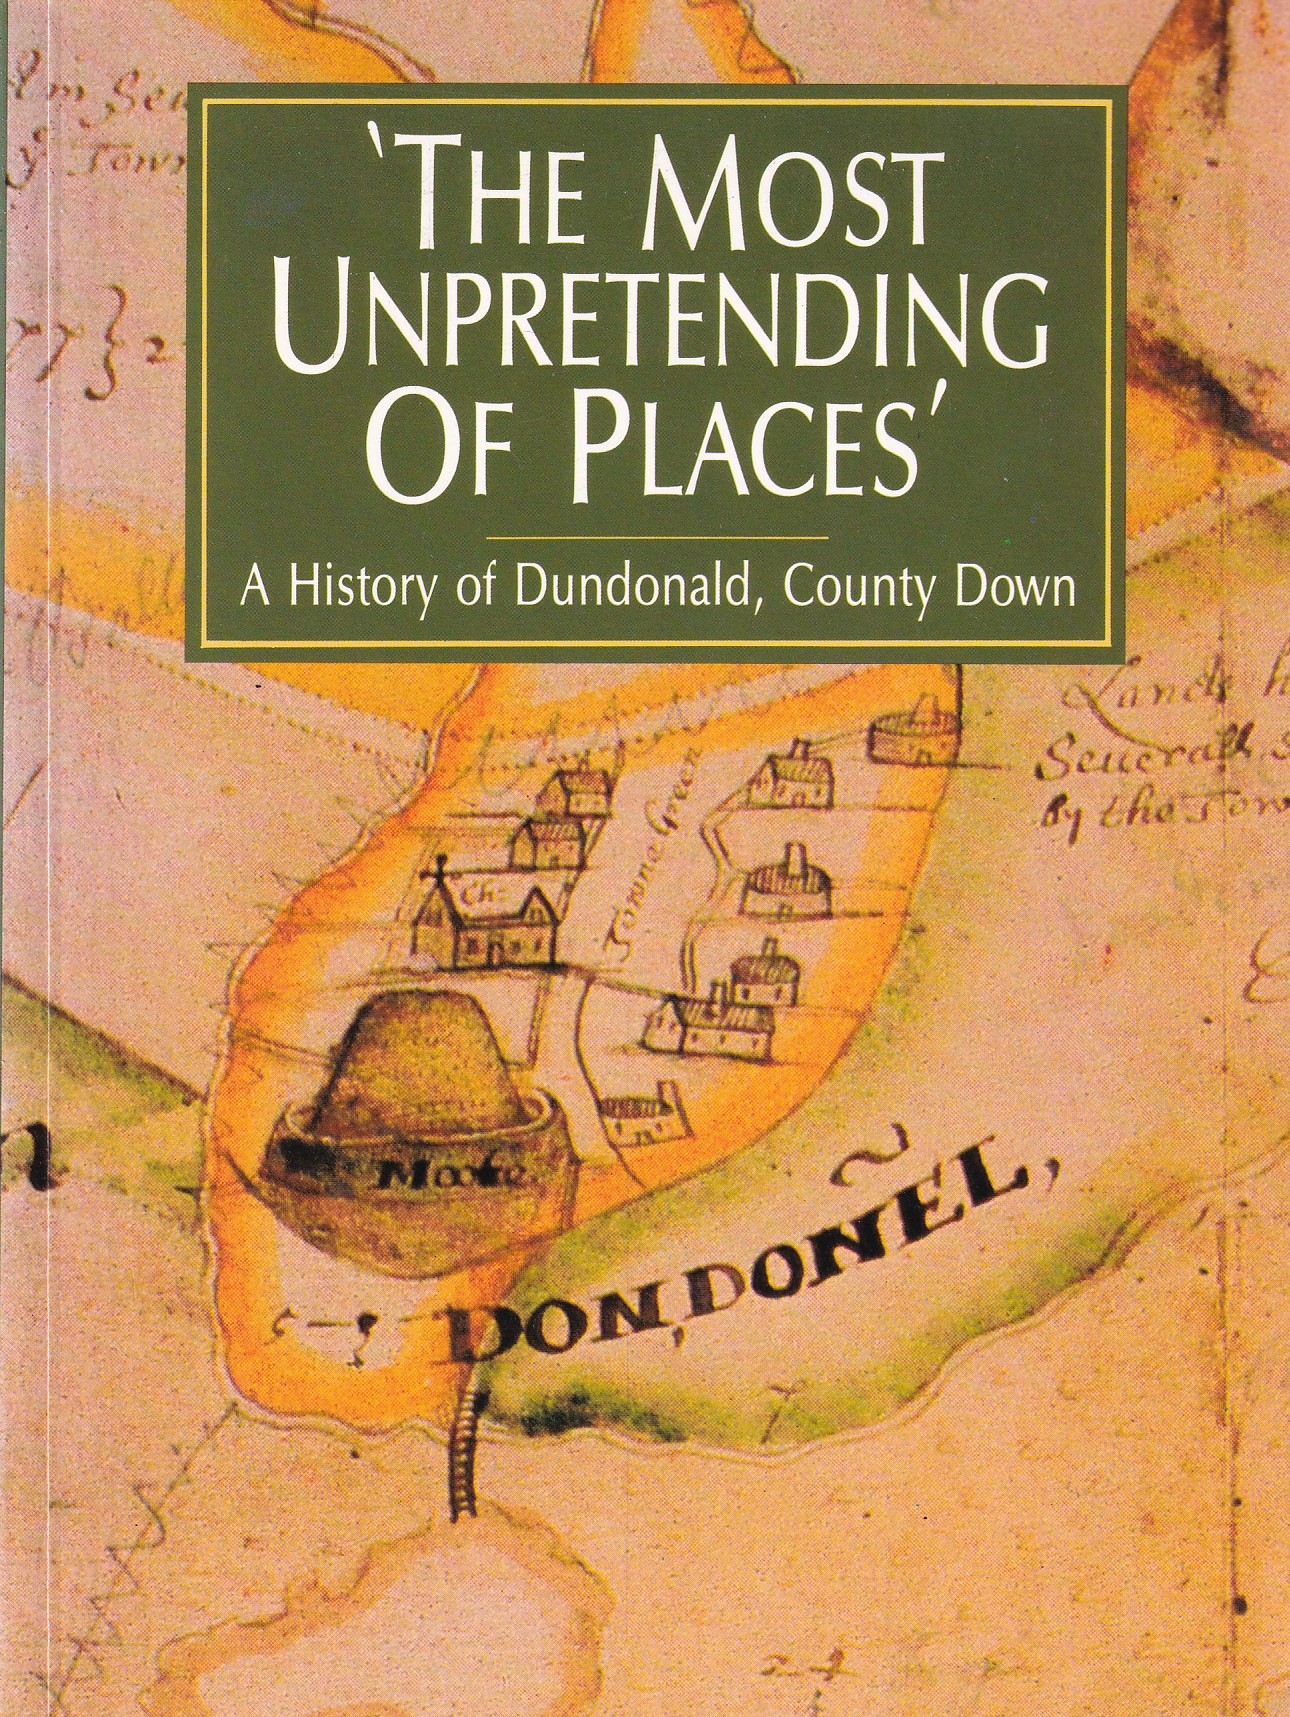 ‘The Most Unpretending of Places’: A History of Dundonald, County Down by Peter Carr